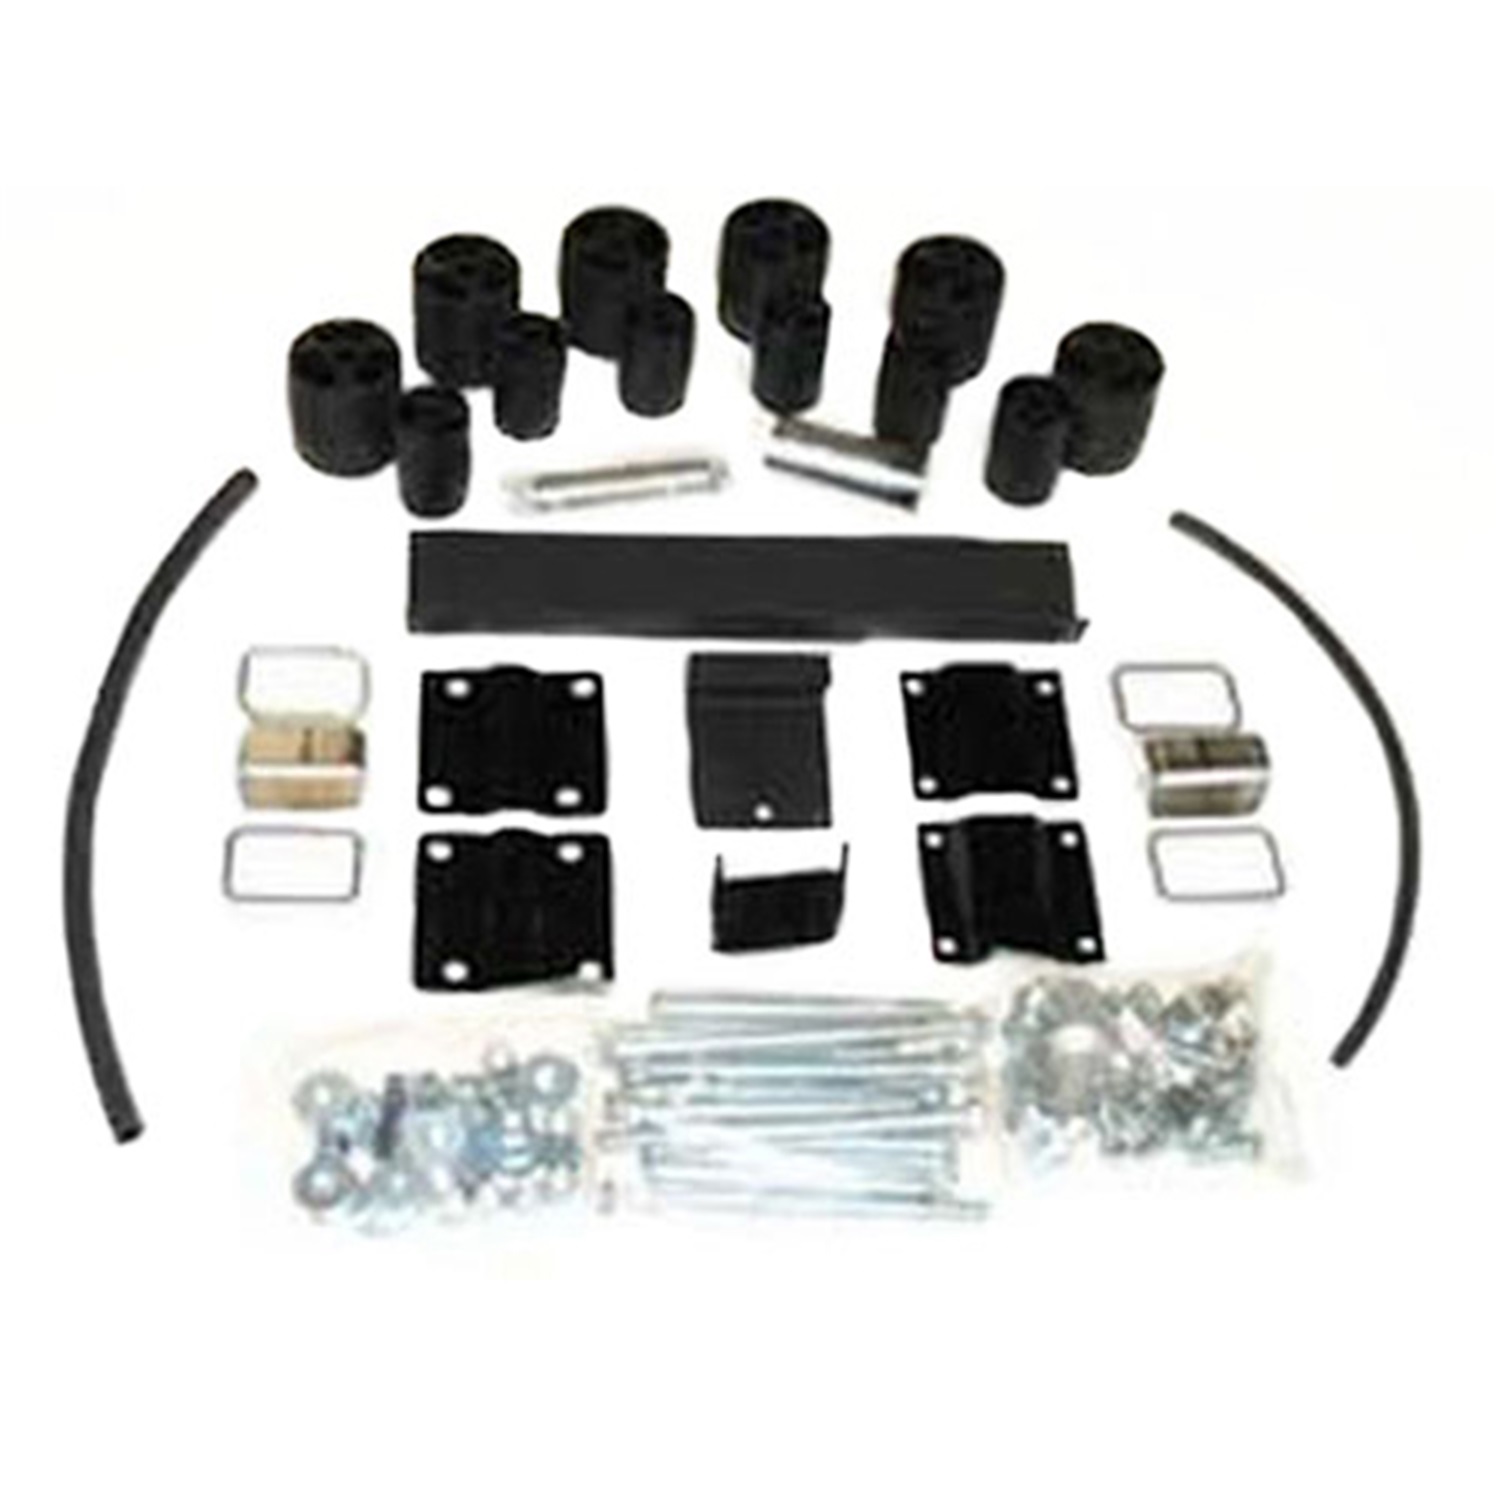 Performance Accessories Performance Accessories 4083 Body Lift Kit Fits 98-00 Frontier